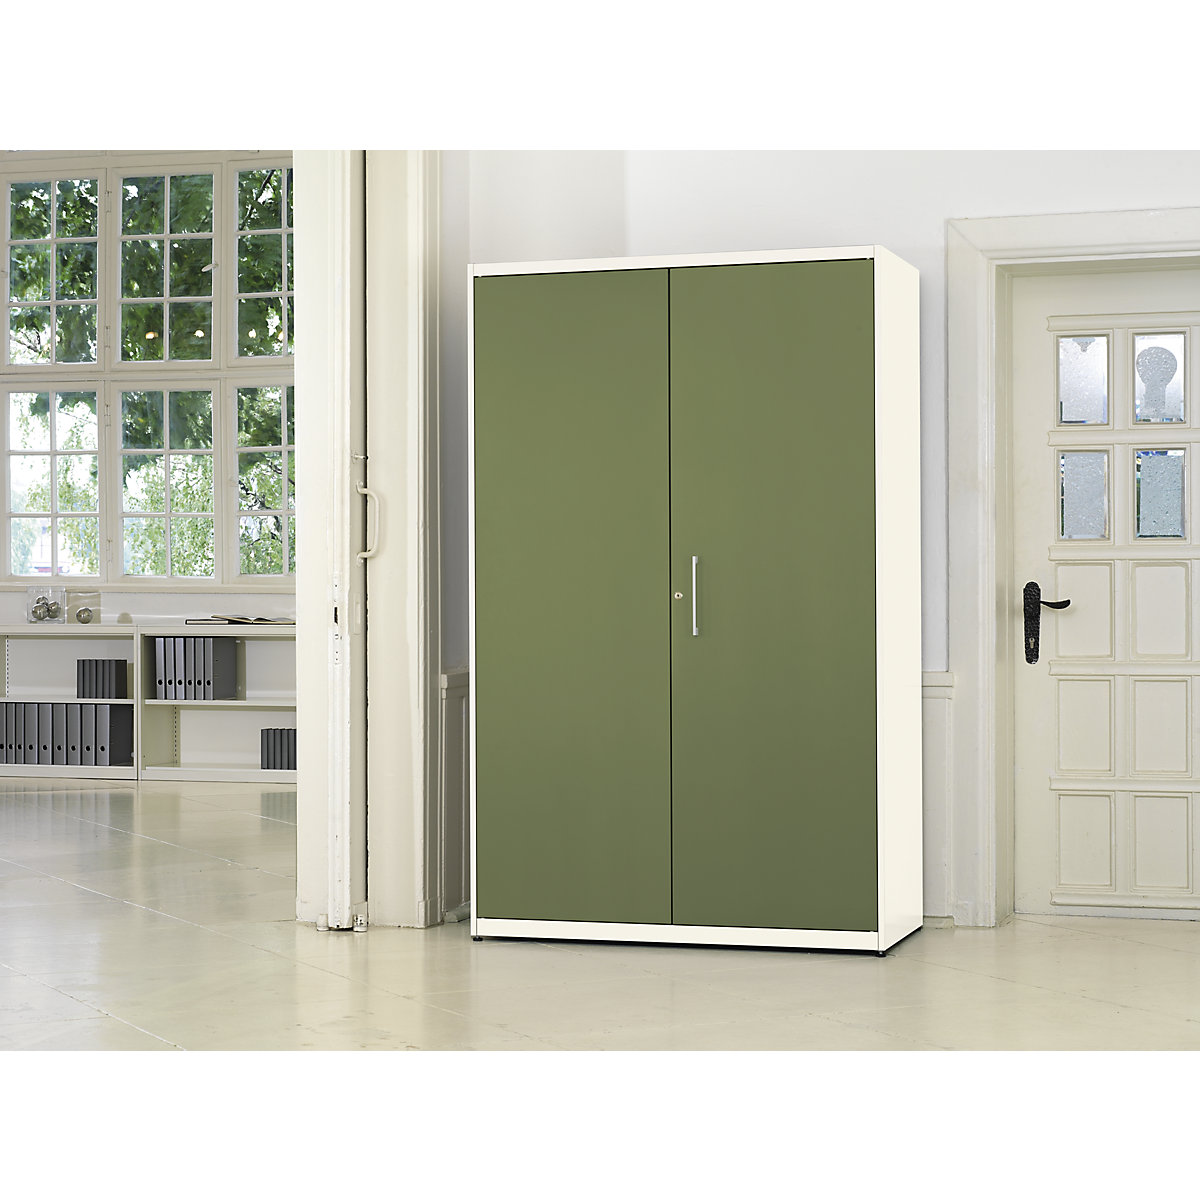 Double door cupboard – mauser, HxW 1956 x 1200 mm, steel cover plate, 4 shelves, pure white / reed green / pure white-11